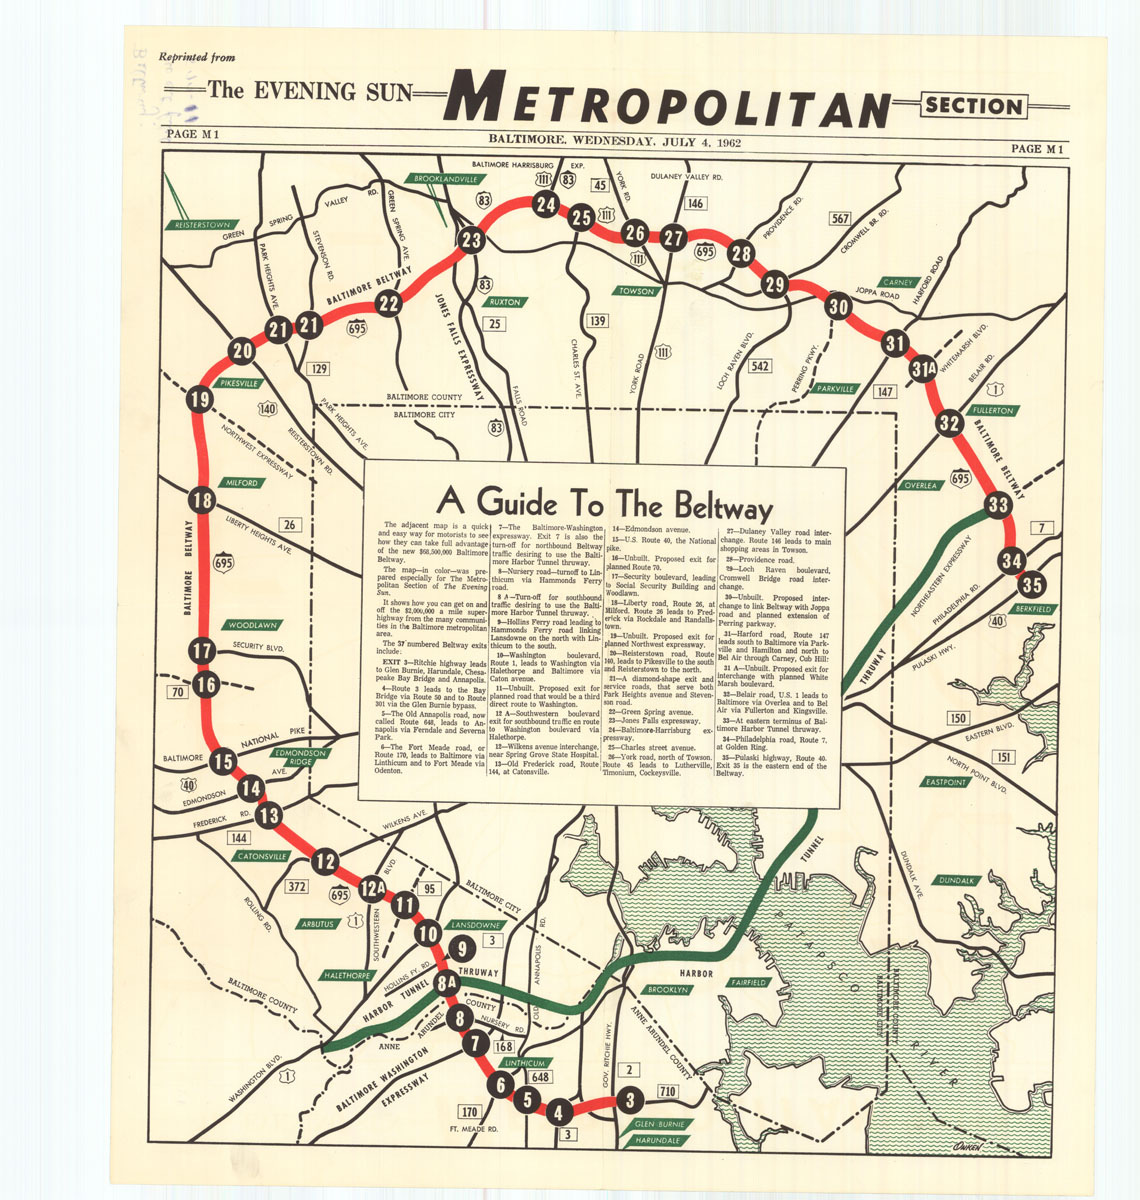 From the Vault: Building the Baltimore Beltway